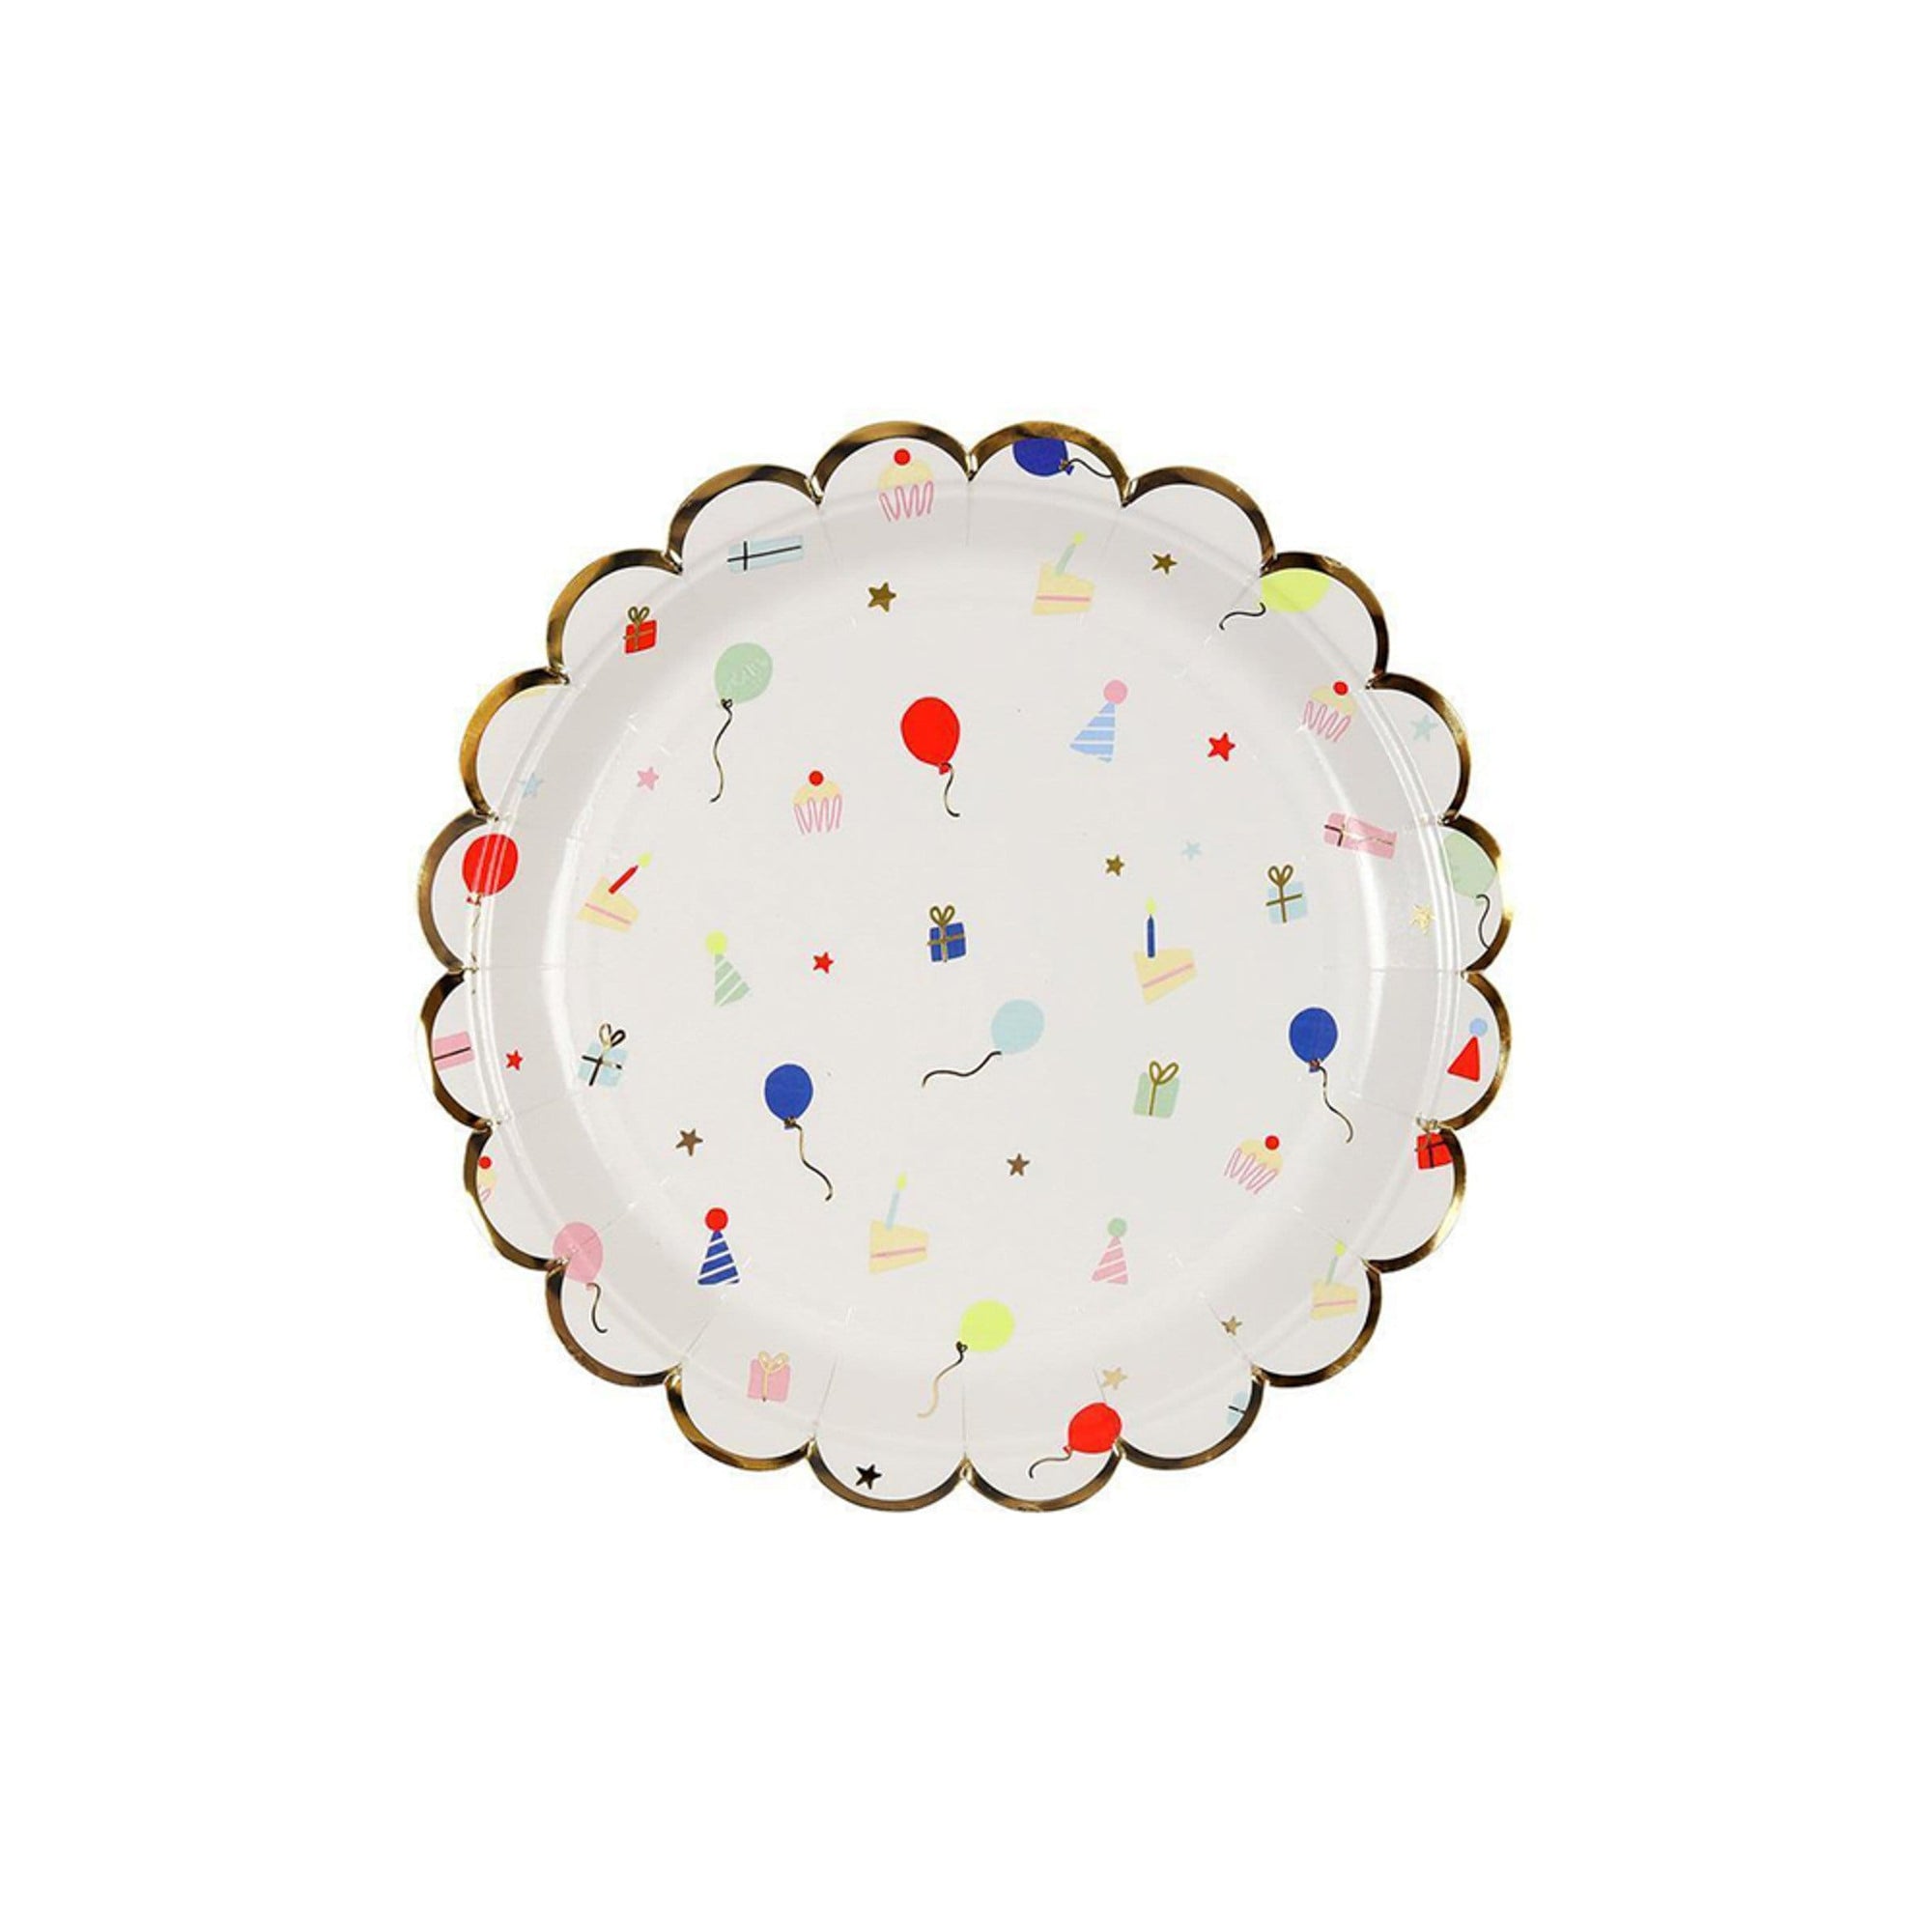 Party Pattern Plates - Small